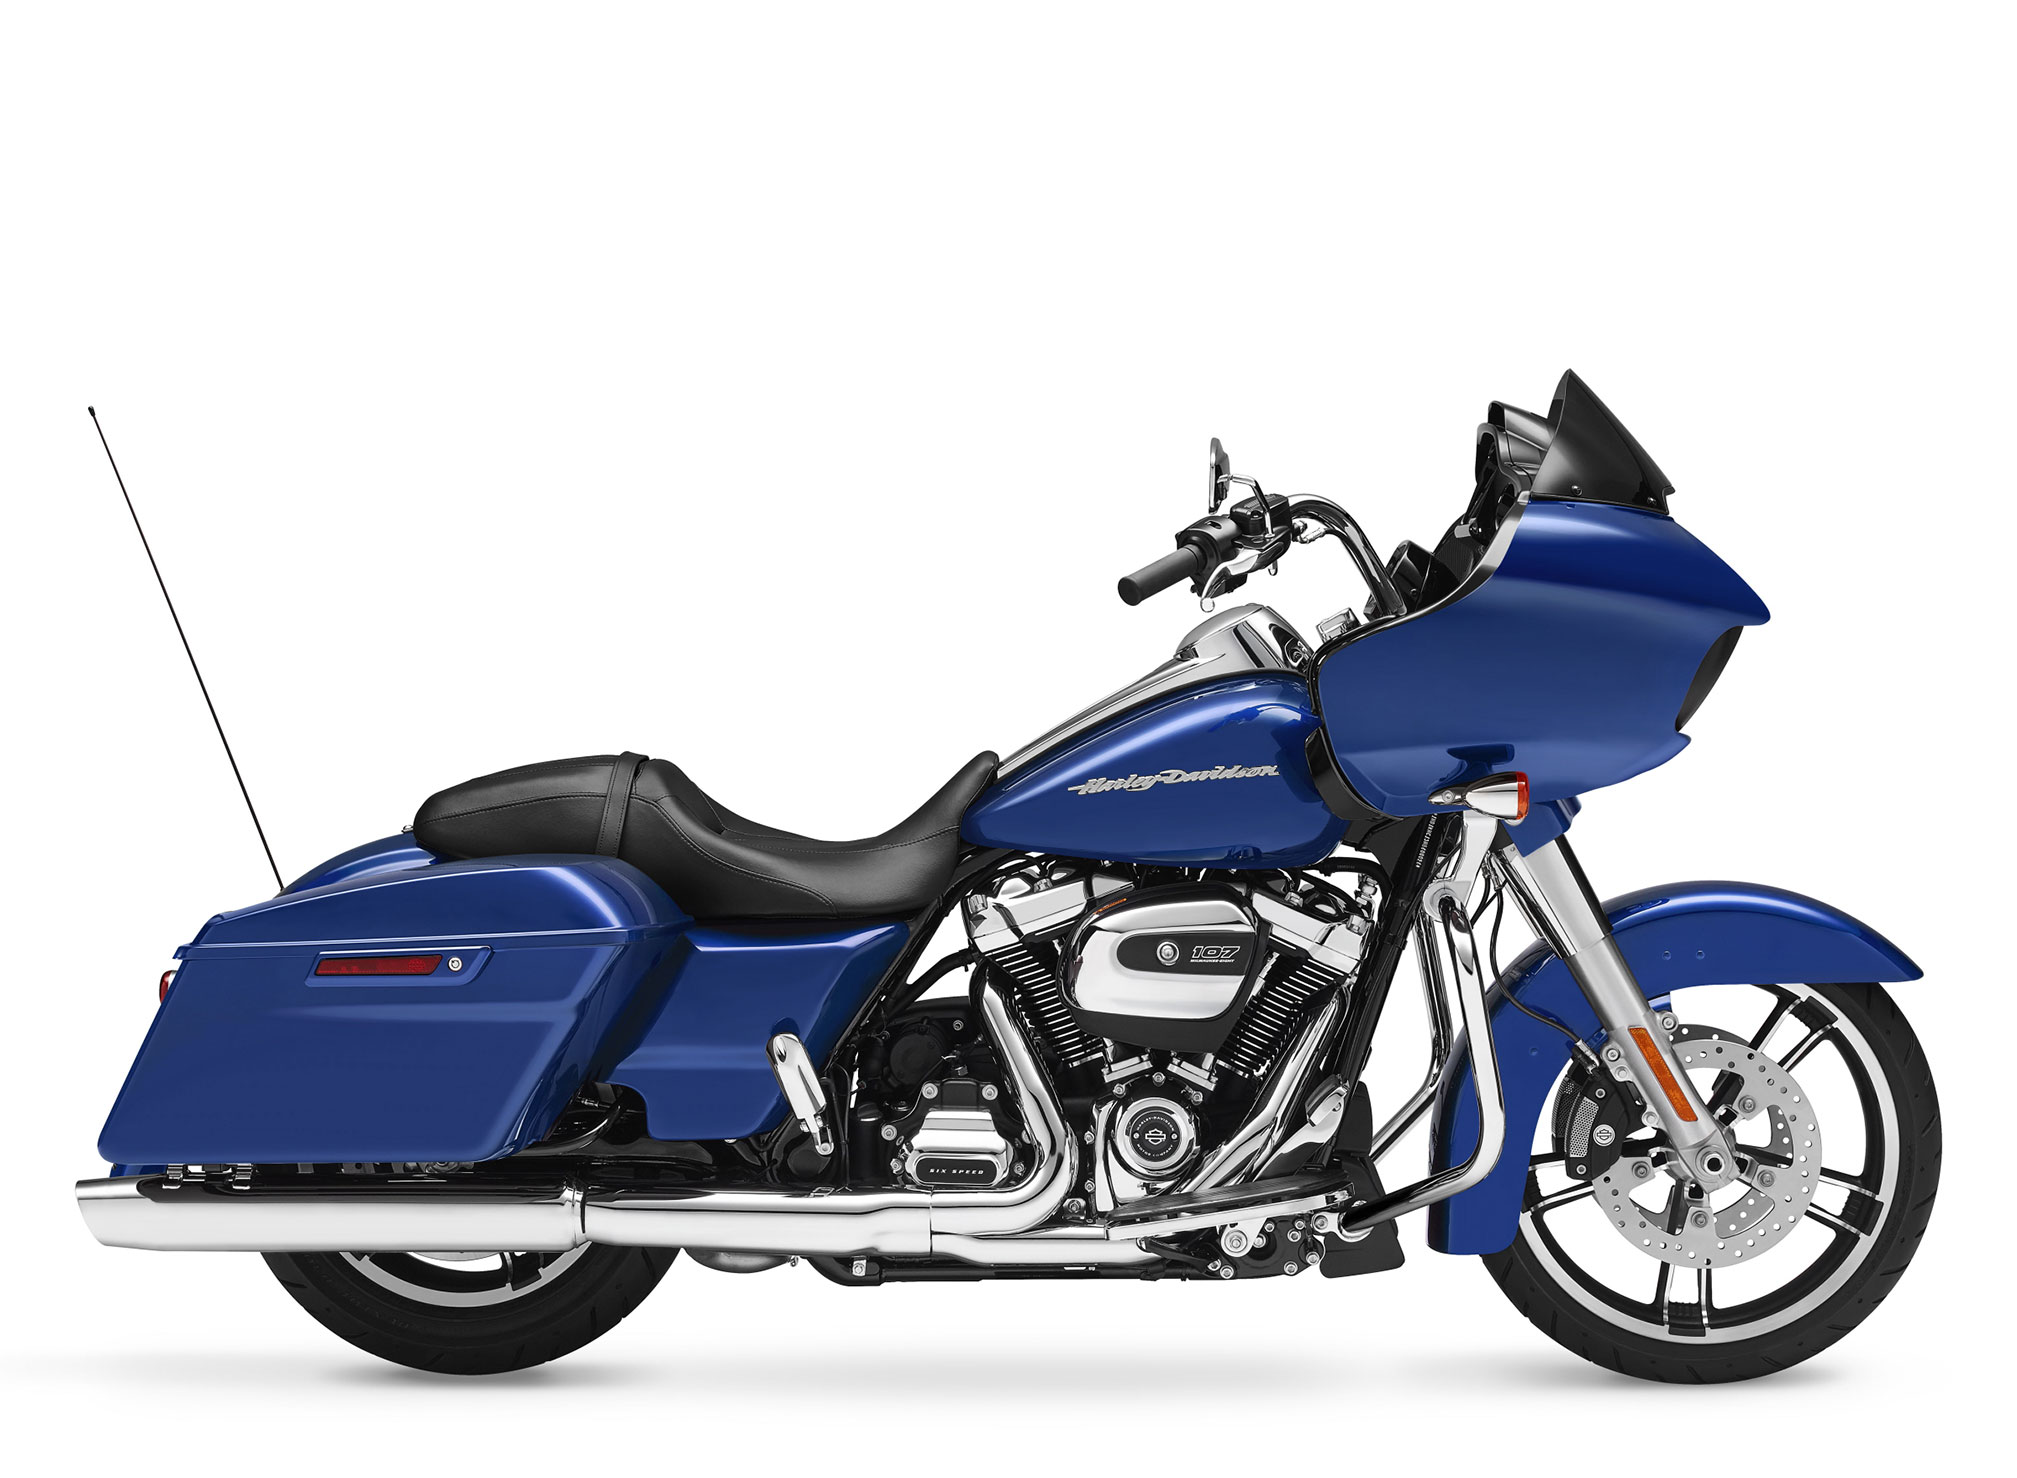 2017 Harley Davidson Road Glide Special Review